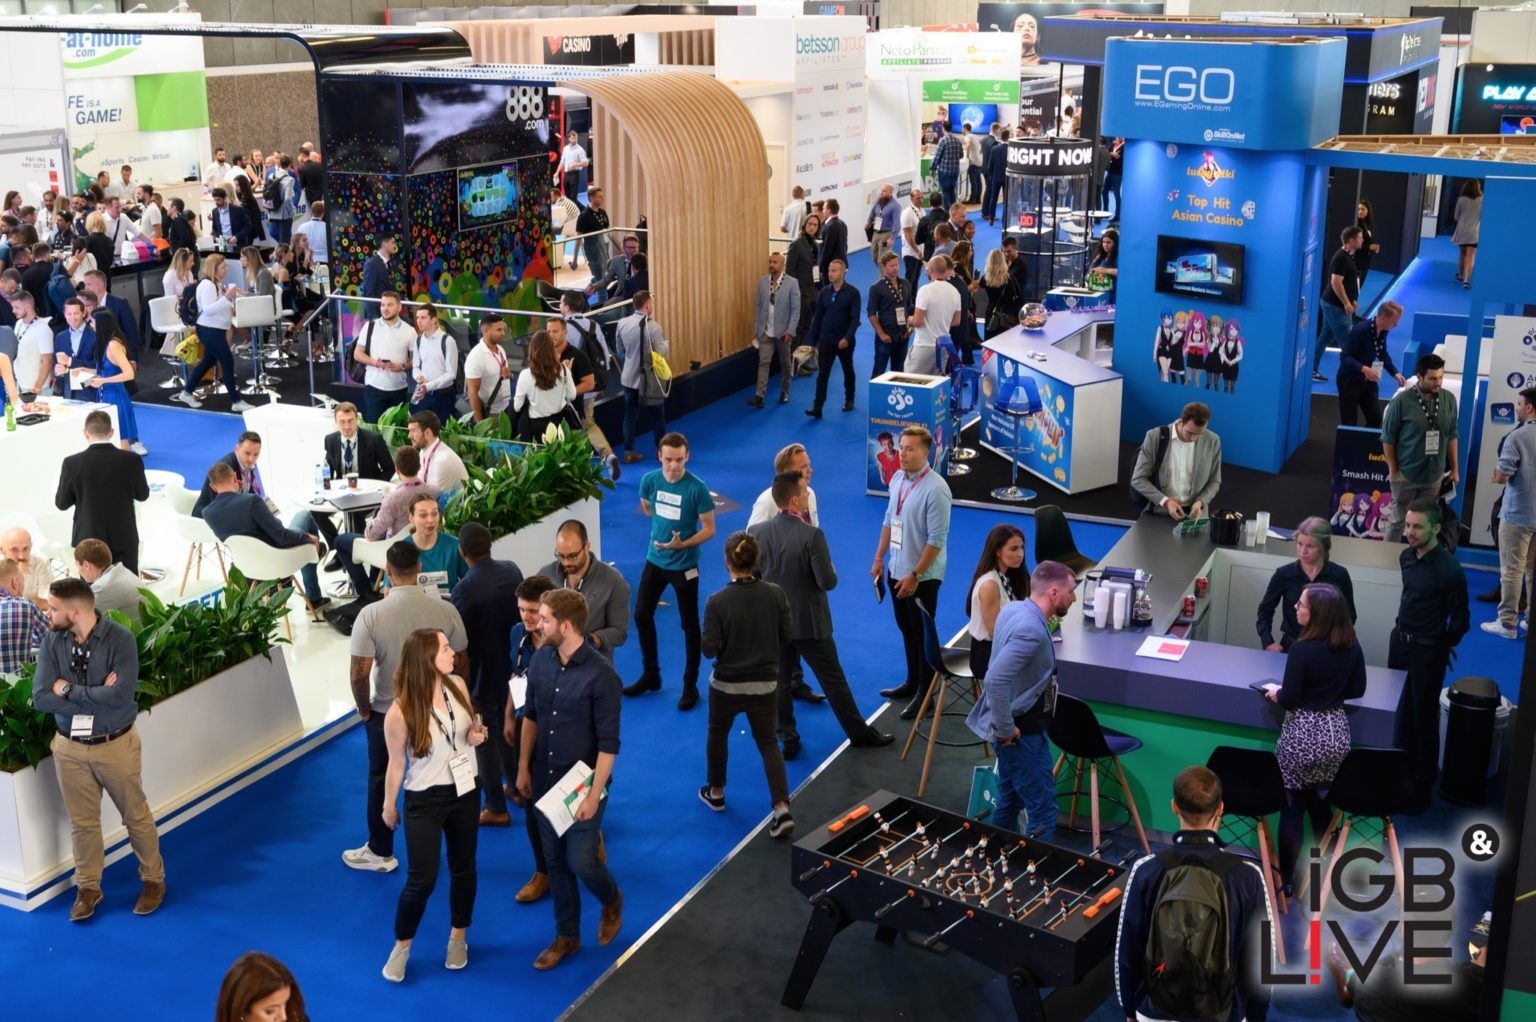 iGB Live! and iGB Affiliate Amsterdam enquiries are at a record high as industry targets